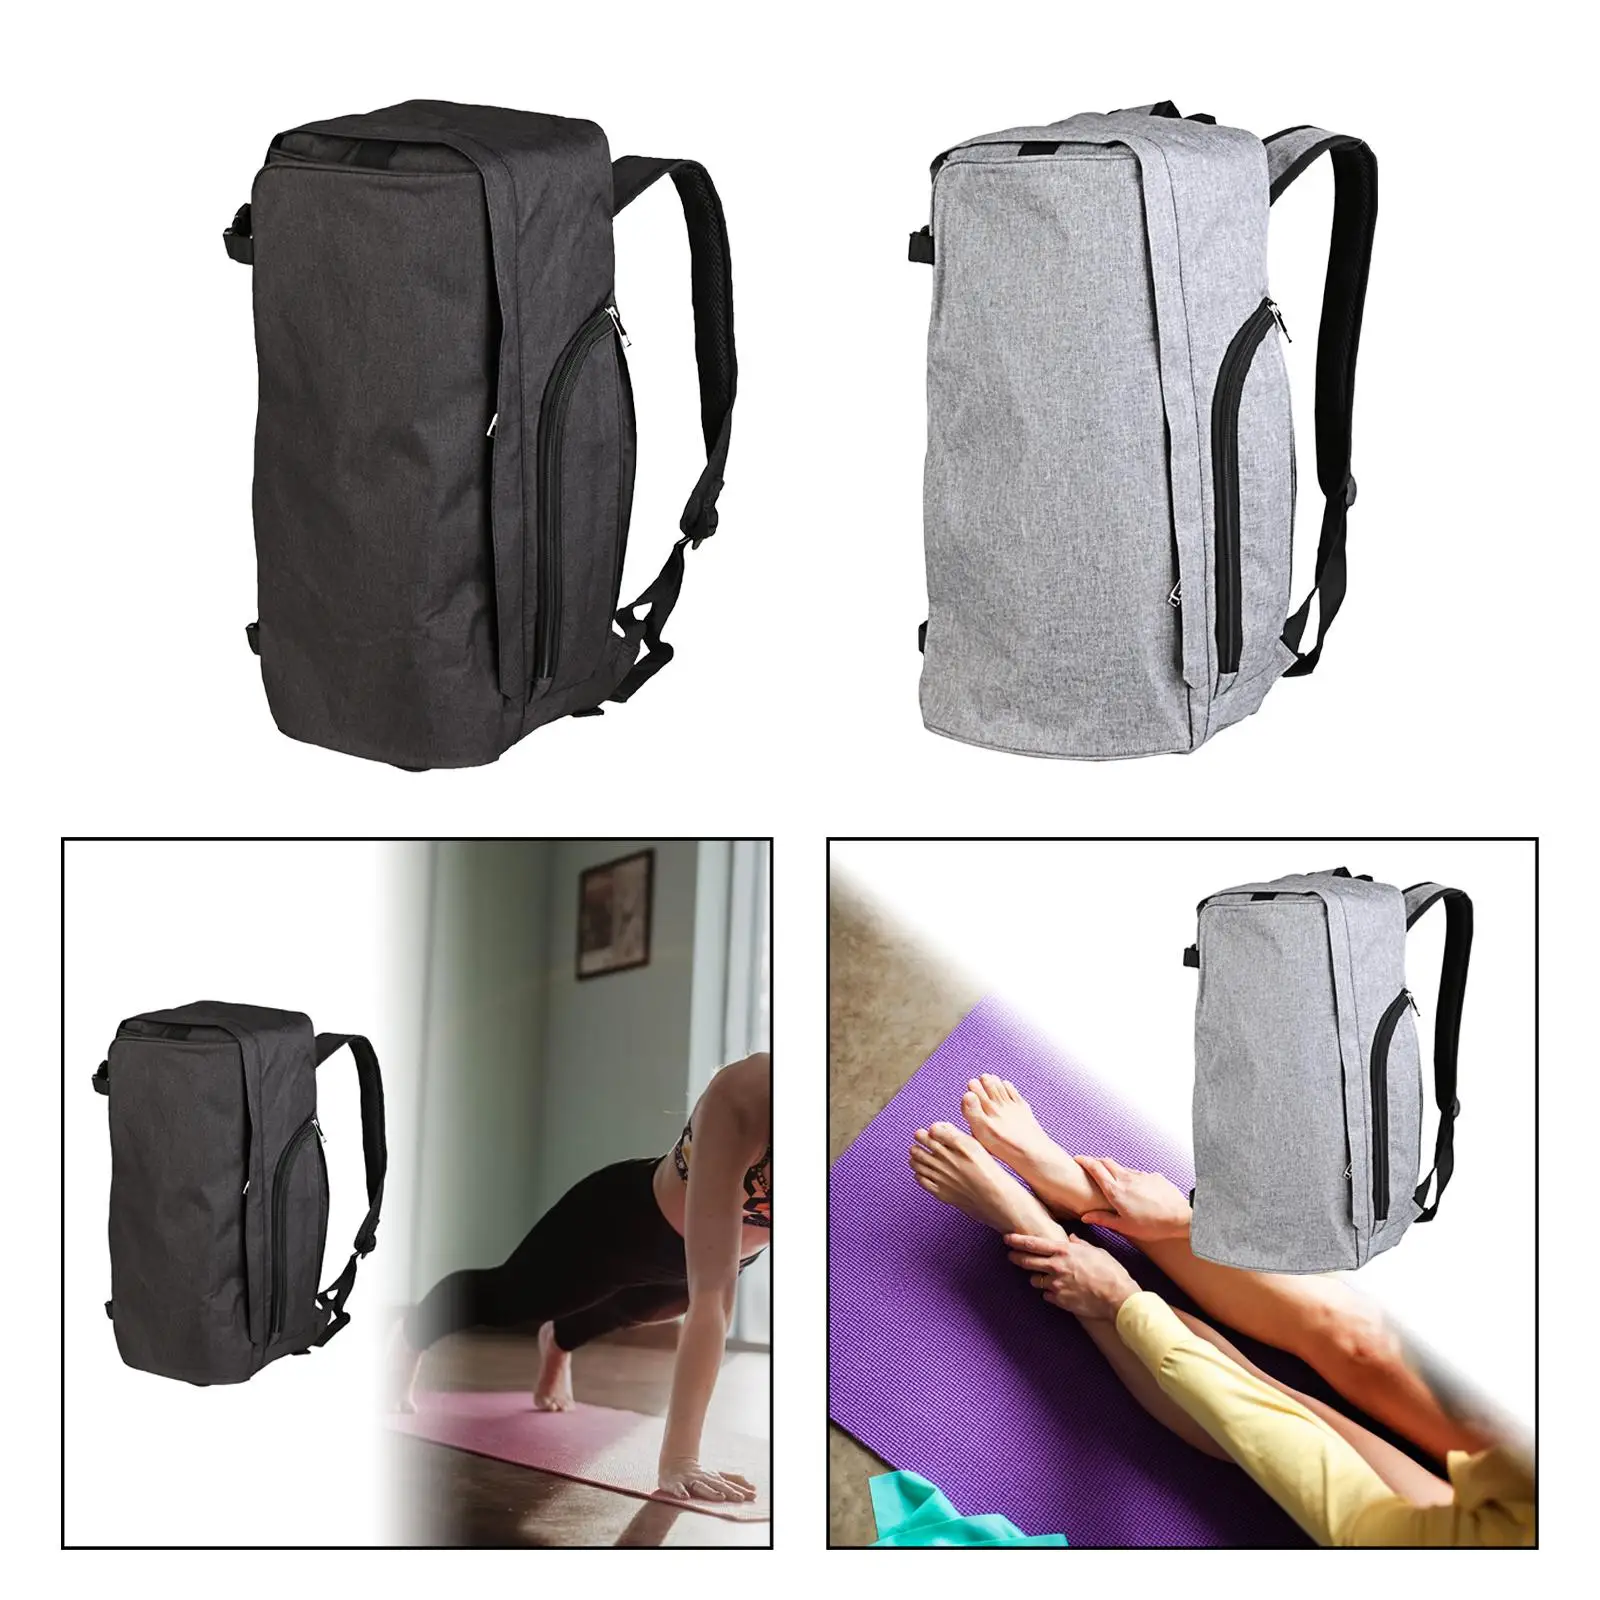 Yoga Mat Carrier Pouch Fashion Durable Multifunction Storage Bag Luggage Bag Yoga Backpack for Yoga Sports Gym Travel Exercise